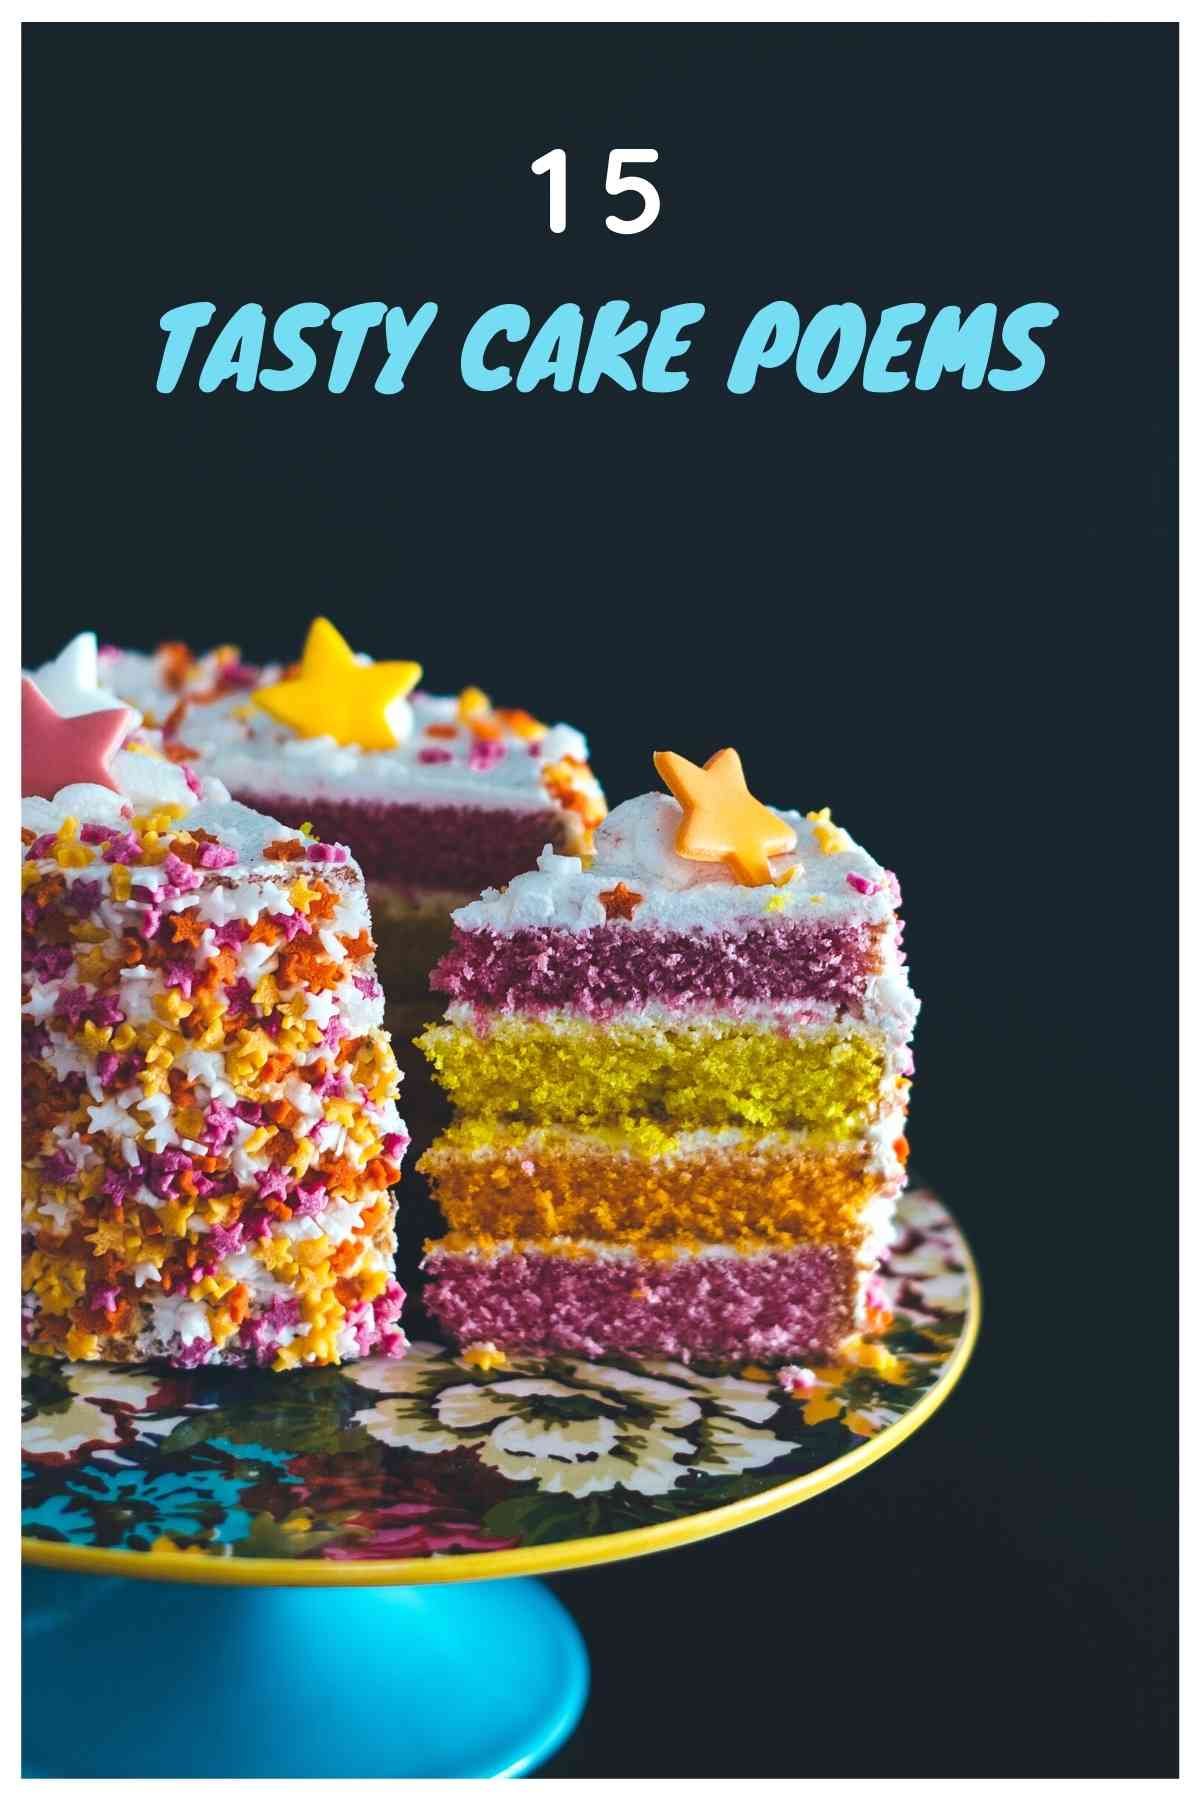 Poems about cake